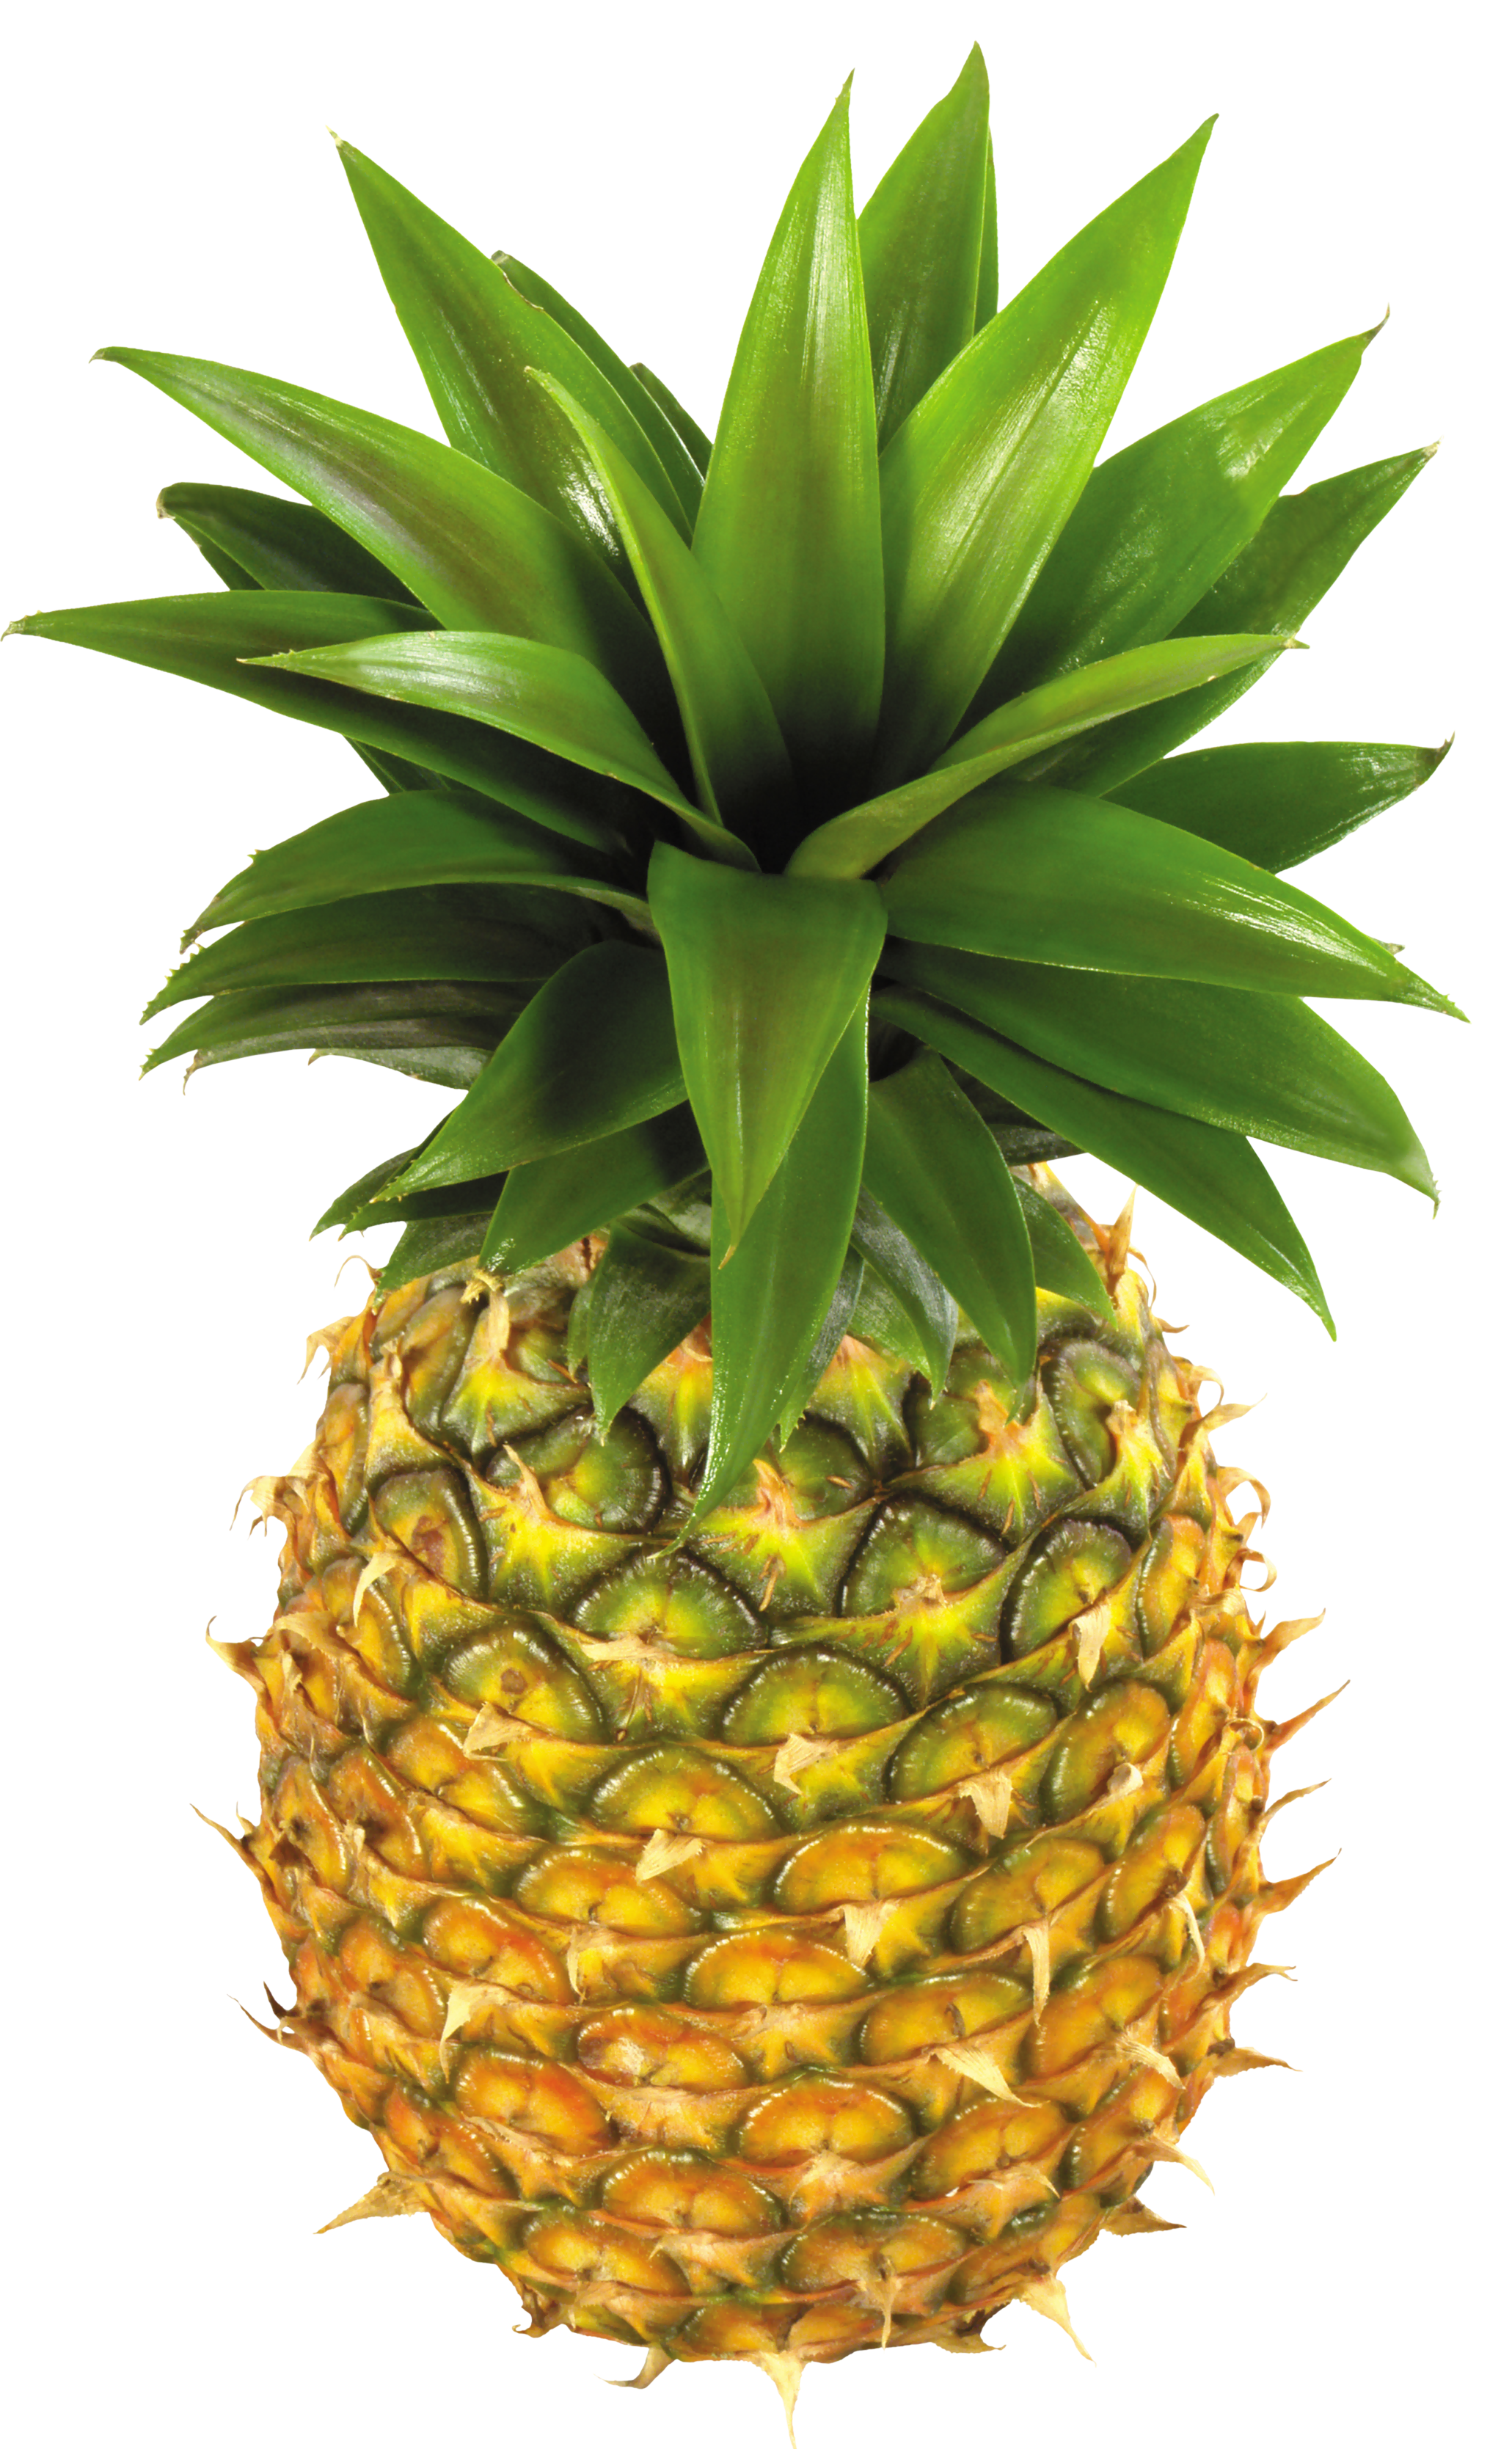 49 Free Pineapple Clipart - Cliparting.com